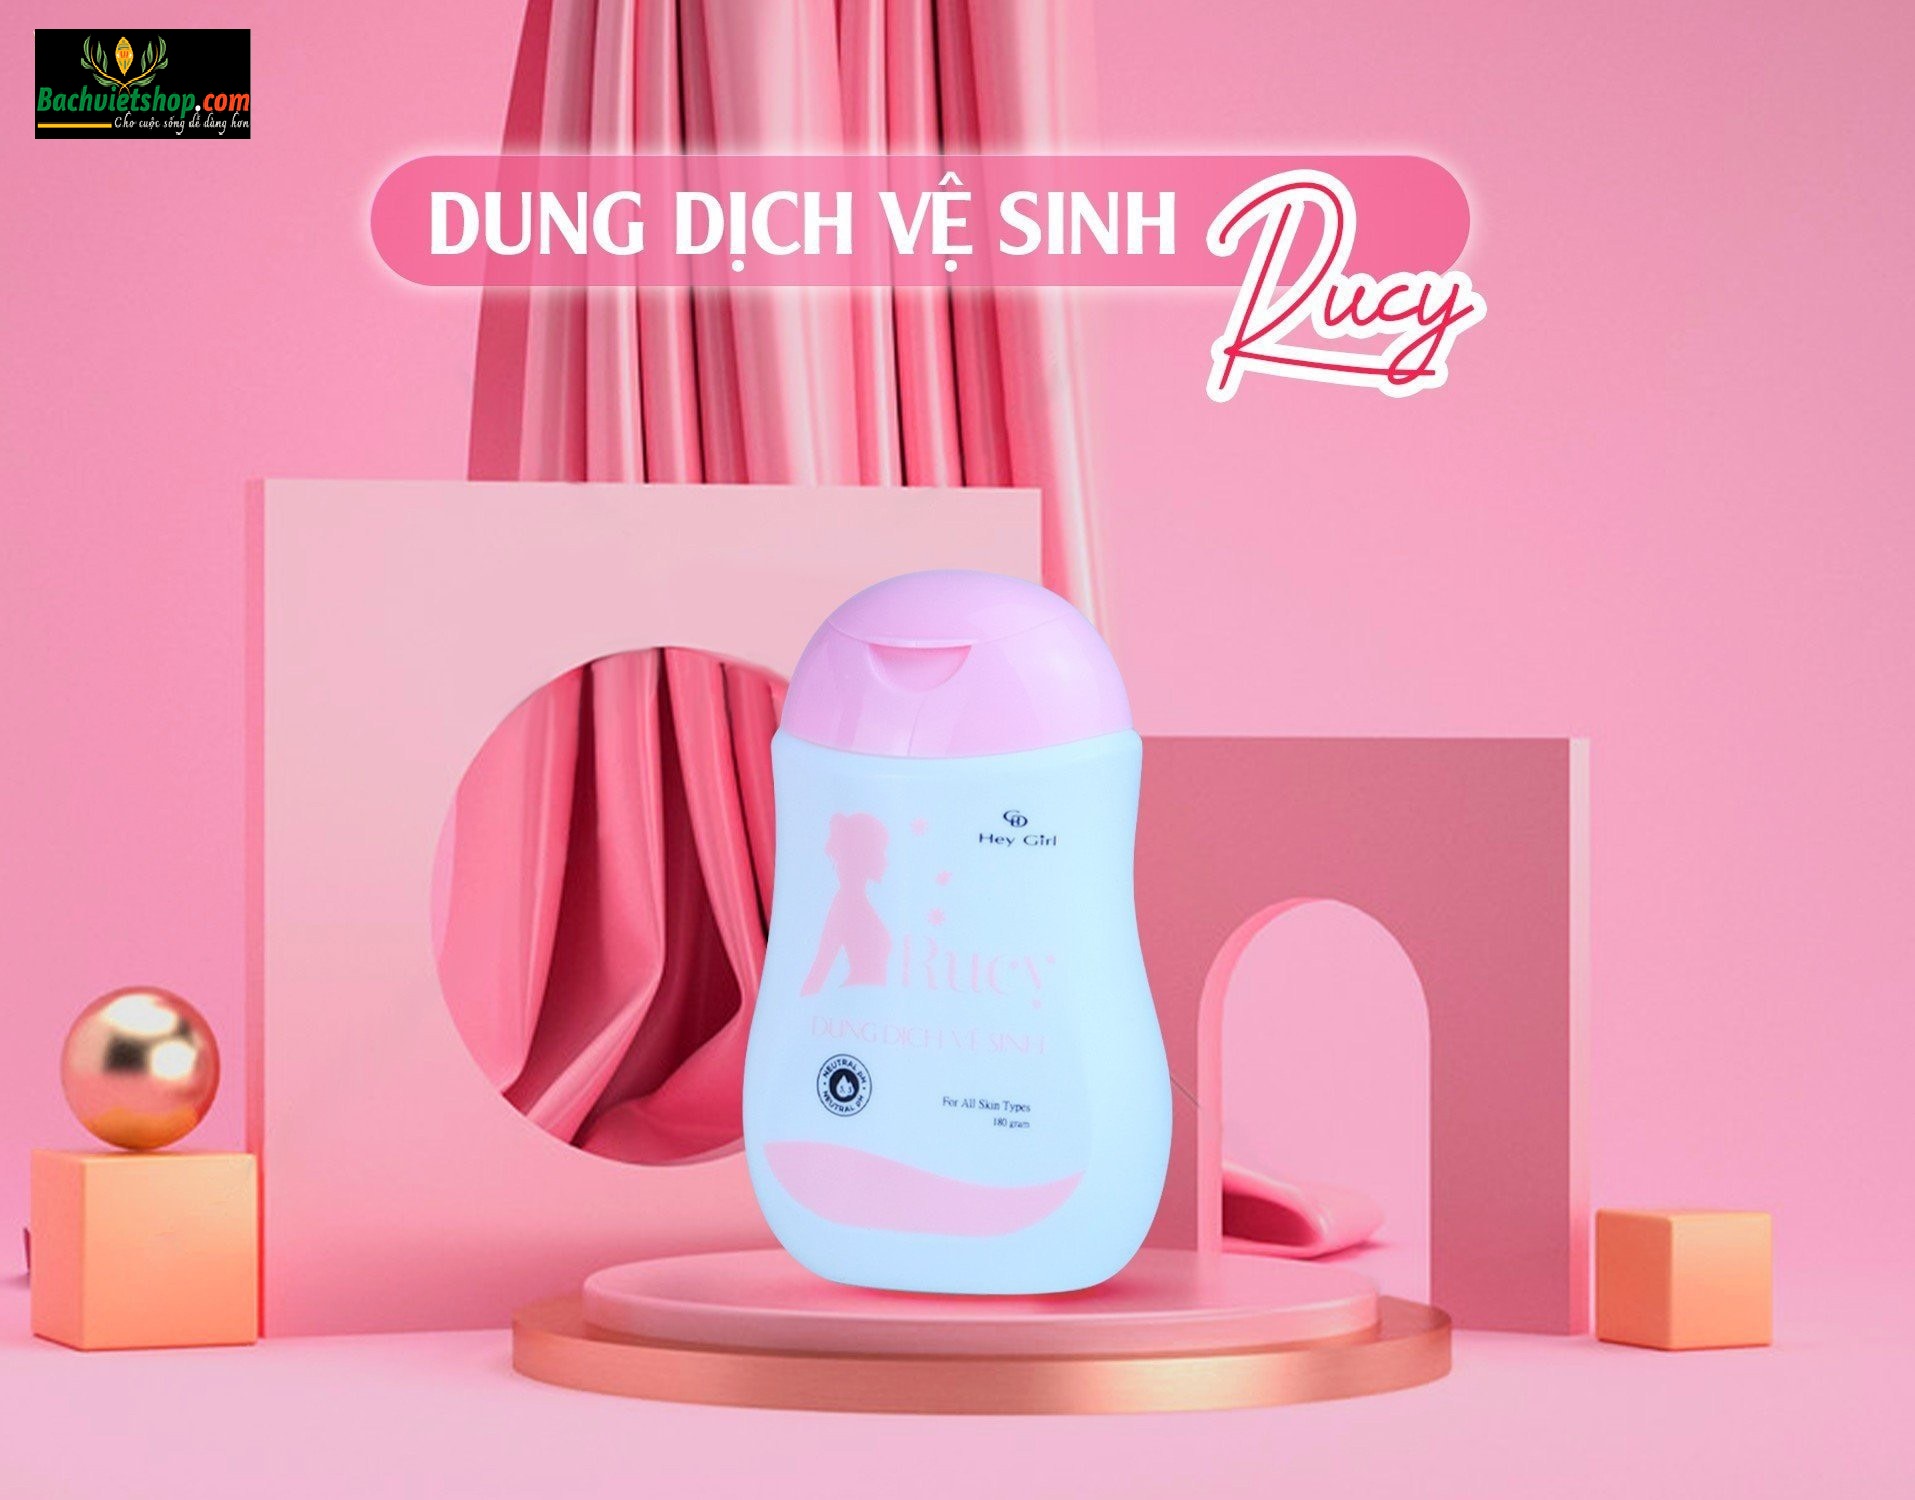 Dung Dịch Vệ Sinh Phụ Nữ Rucy